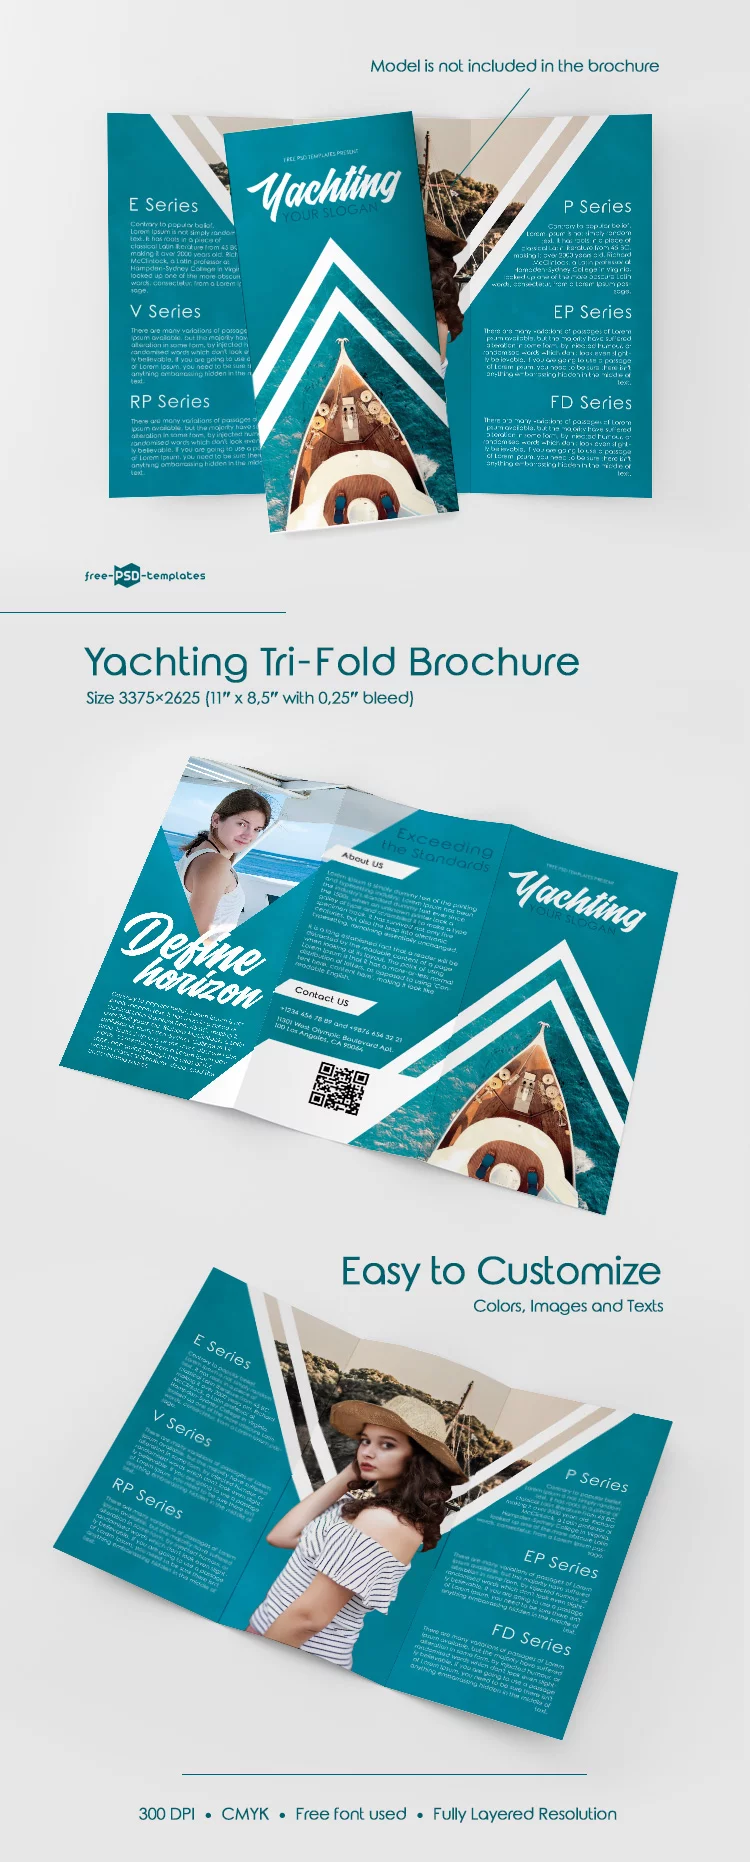 Free Yachting Tri-Fold Brochure in PSD